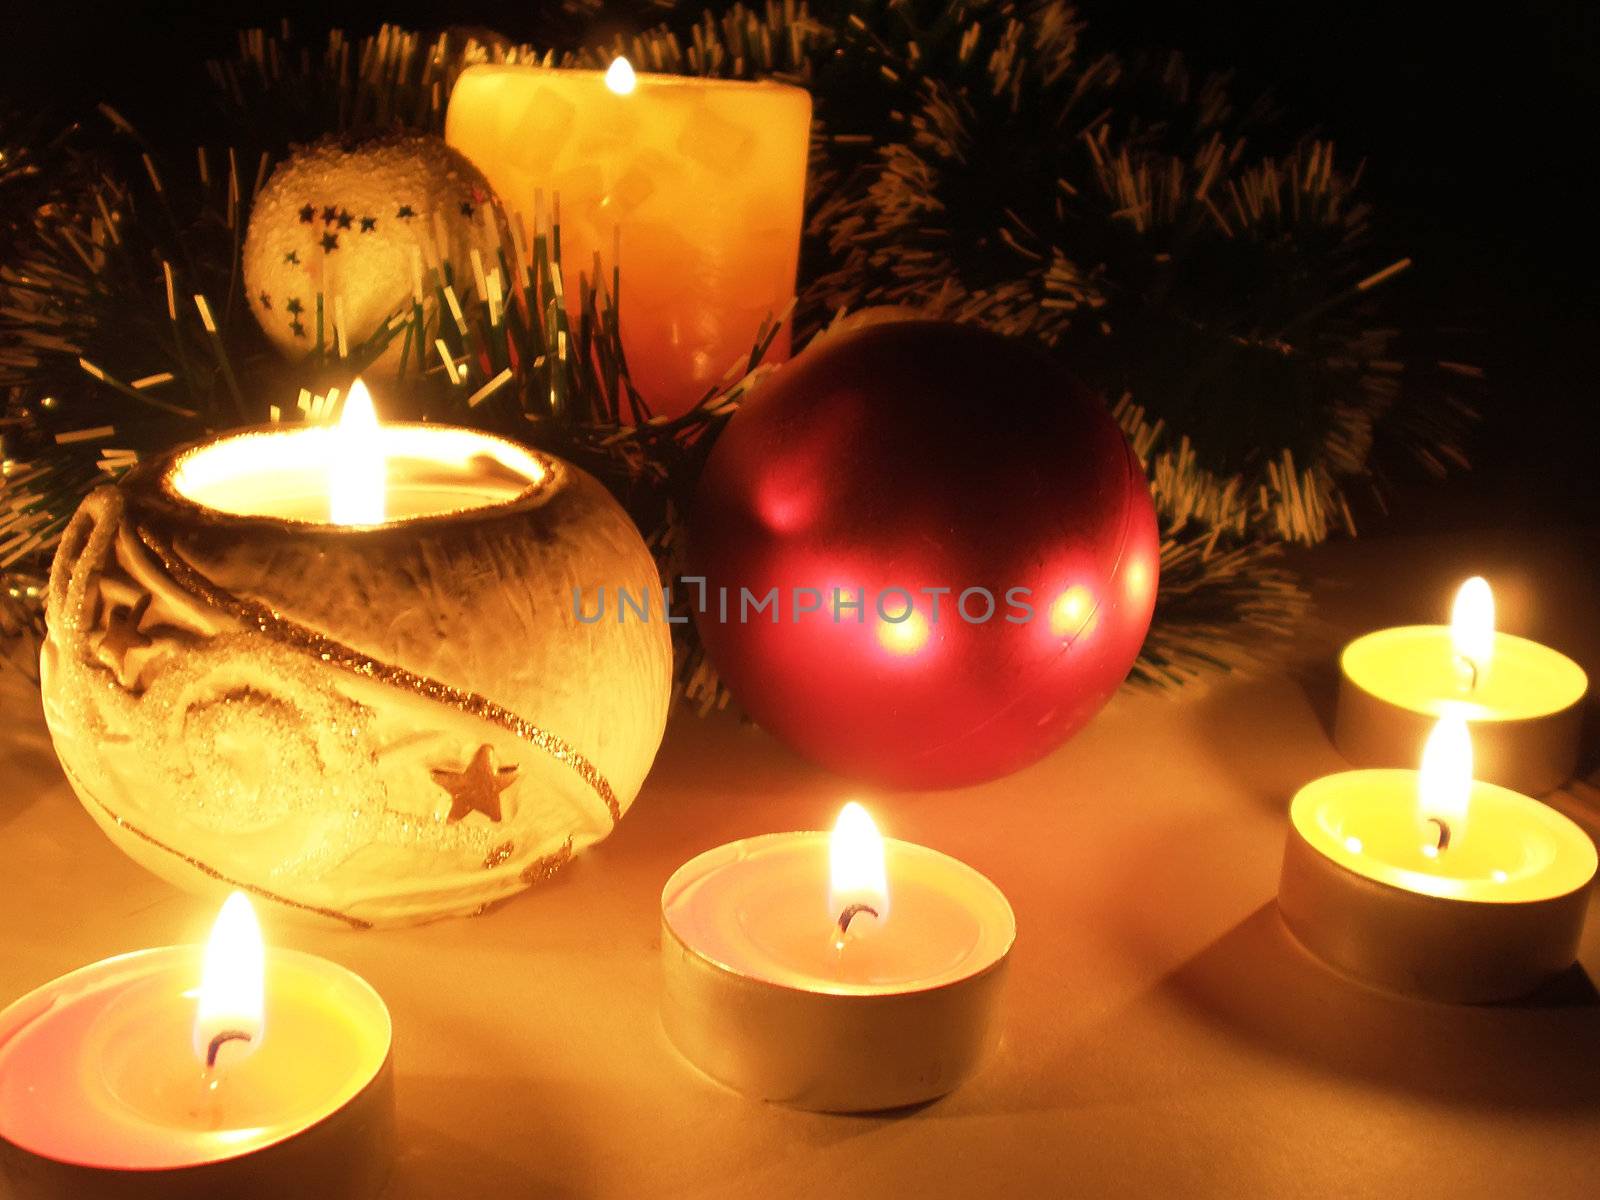 Christmas ornament with romantic candle light decoration